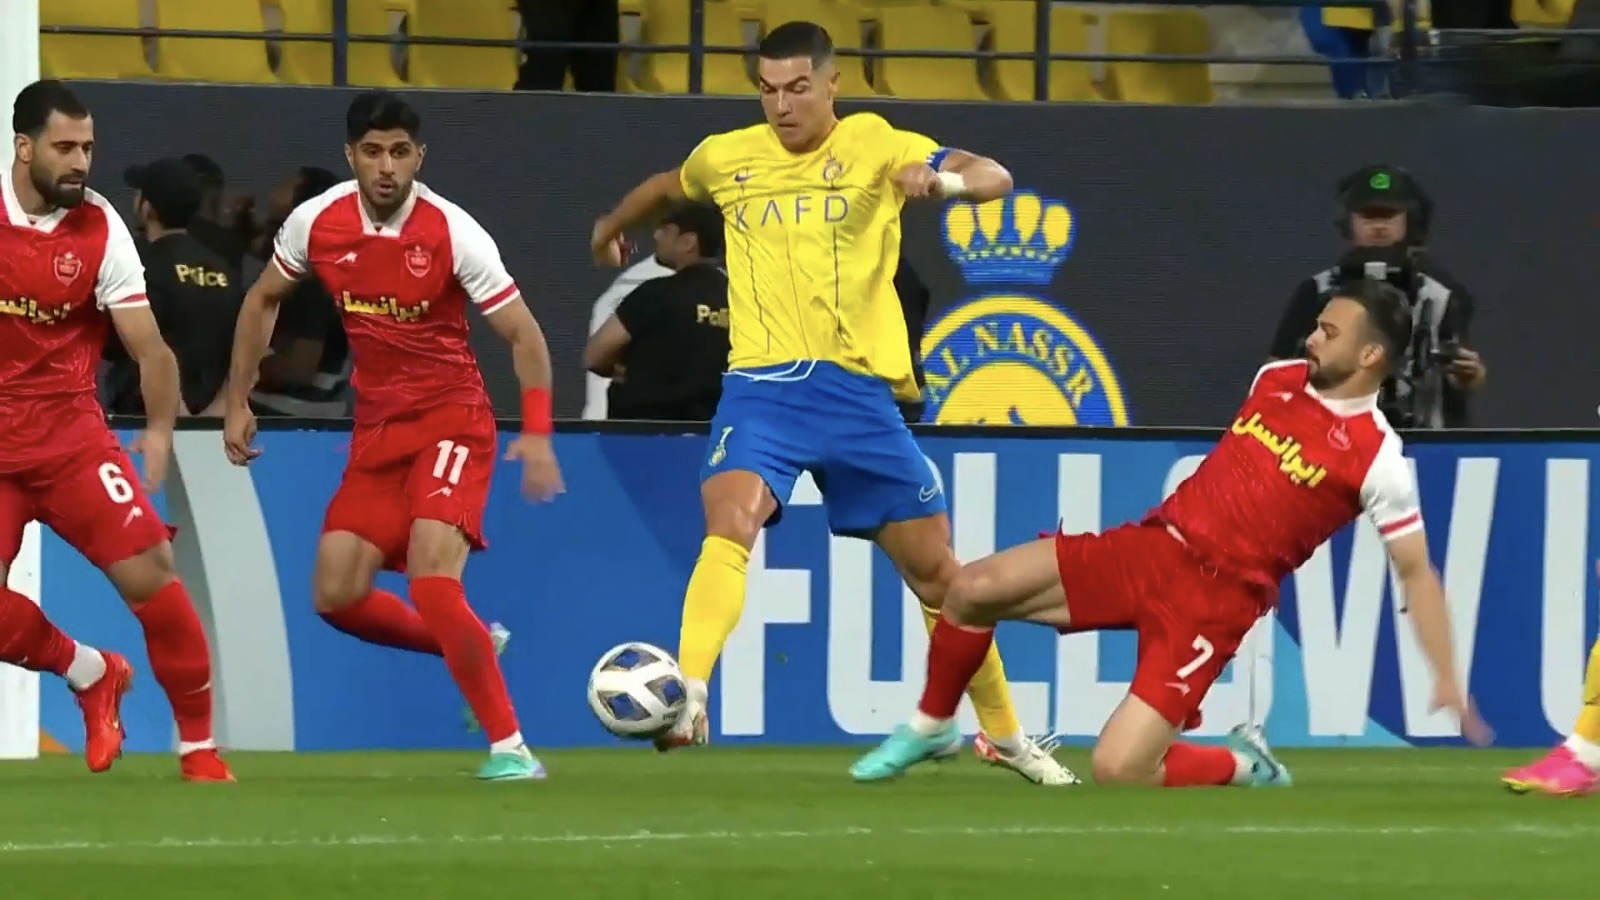 Al-Nassr and Persepolis FC's contest ends in a goalless draw